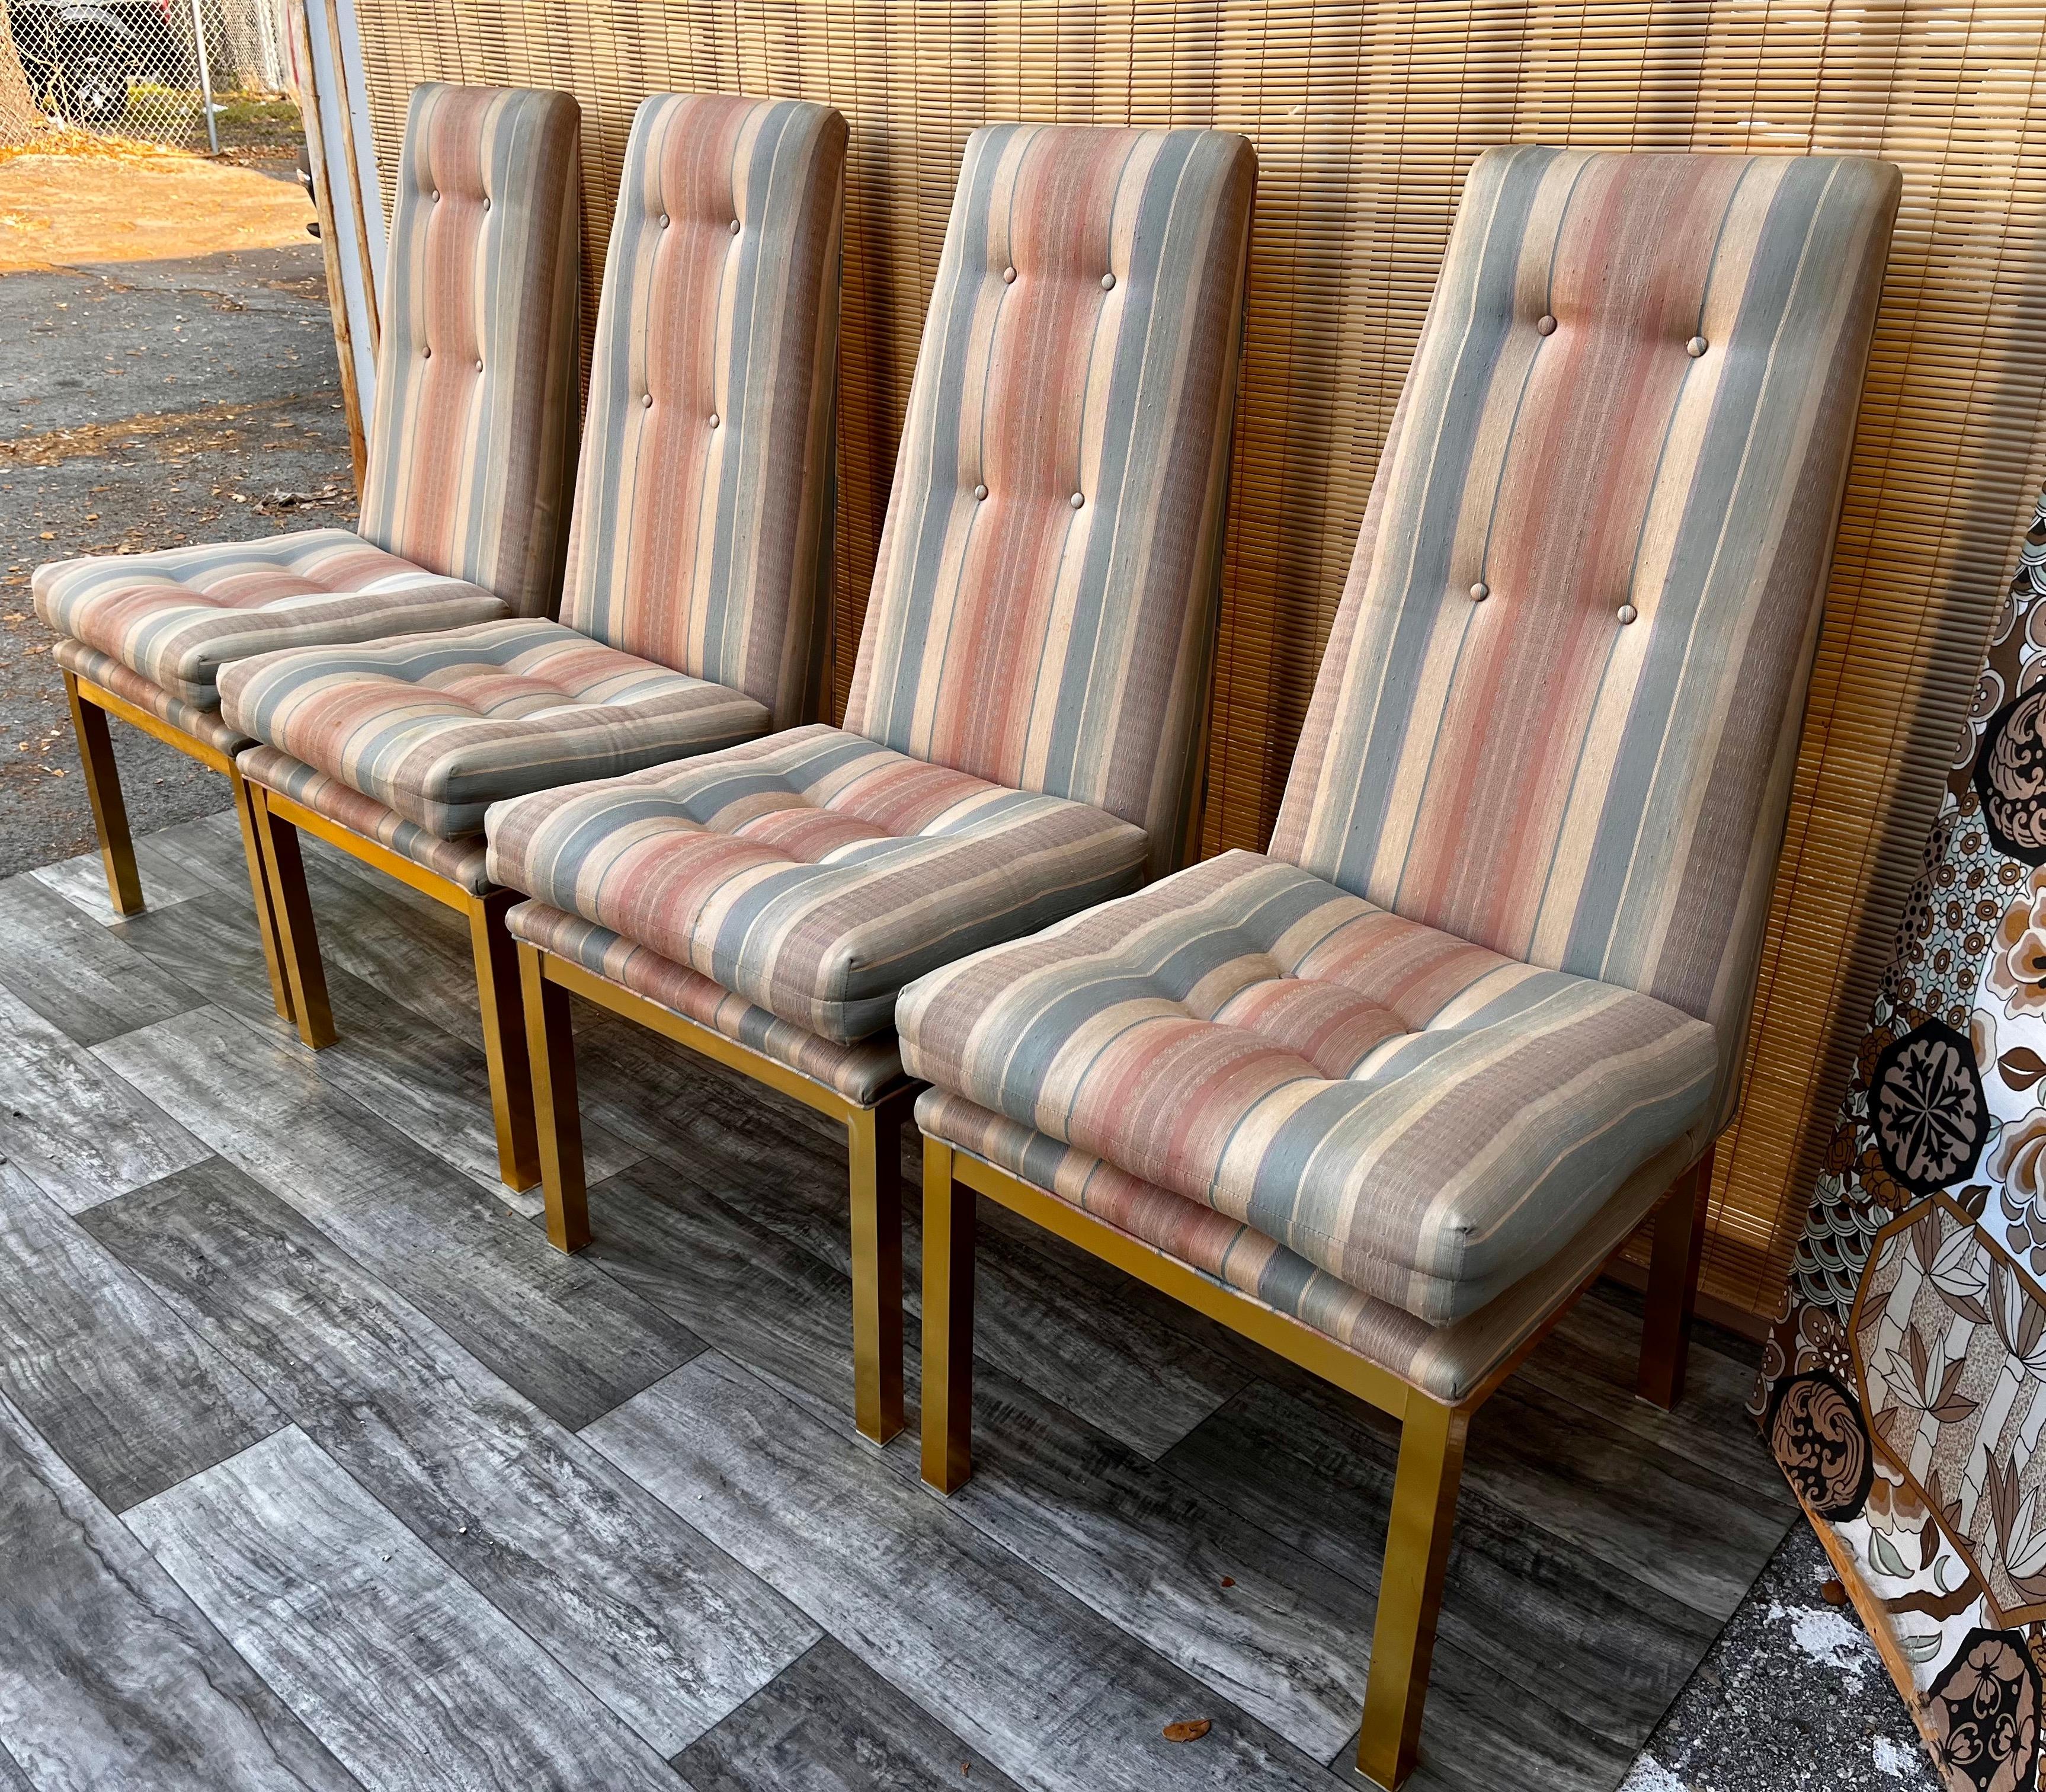 Aluminum Set of Four 1960s Mid-Century Modern Dining Chairs in the Adrain Pearsall Style For Sale